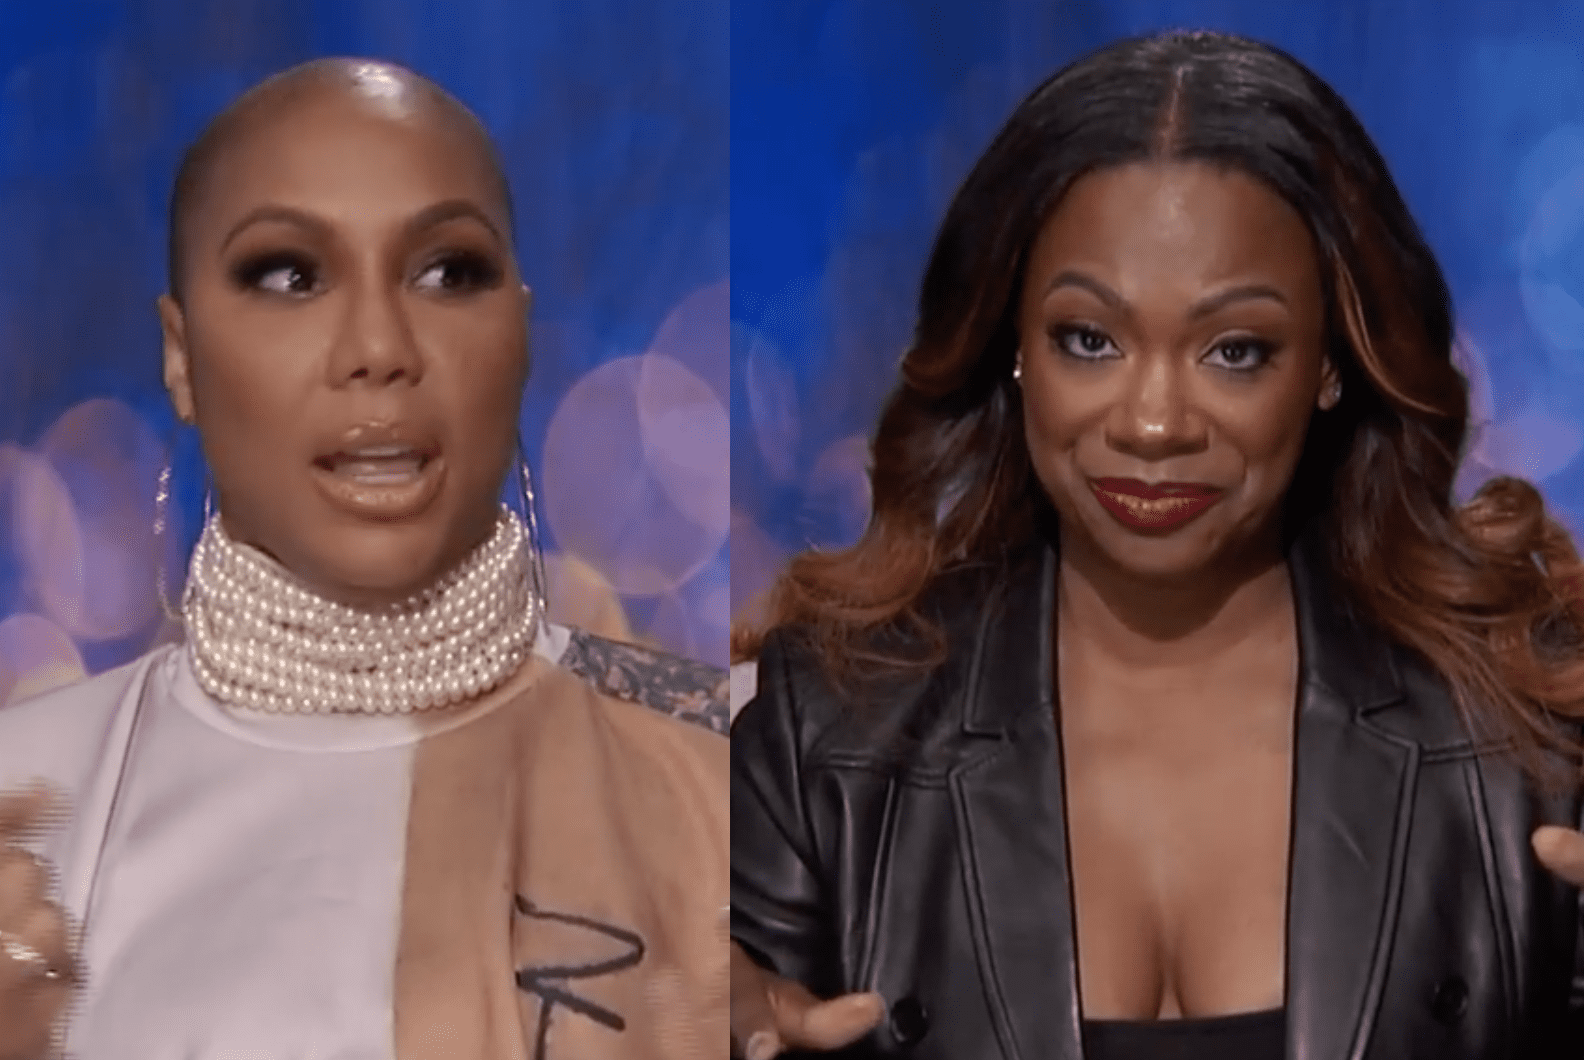 The Latest Video From Celebrity Big Brother Shows Tamar Braxton And Kandi Burruss Squashing Their Beef